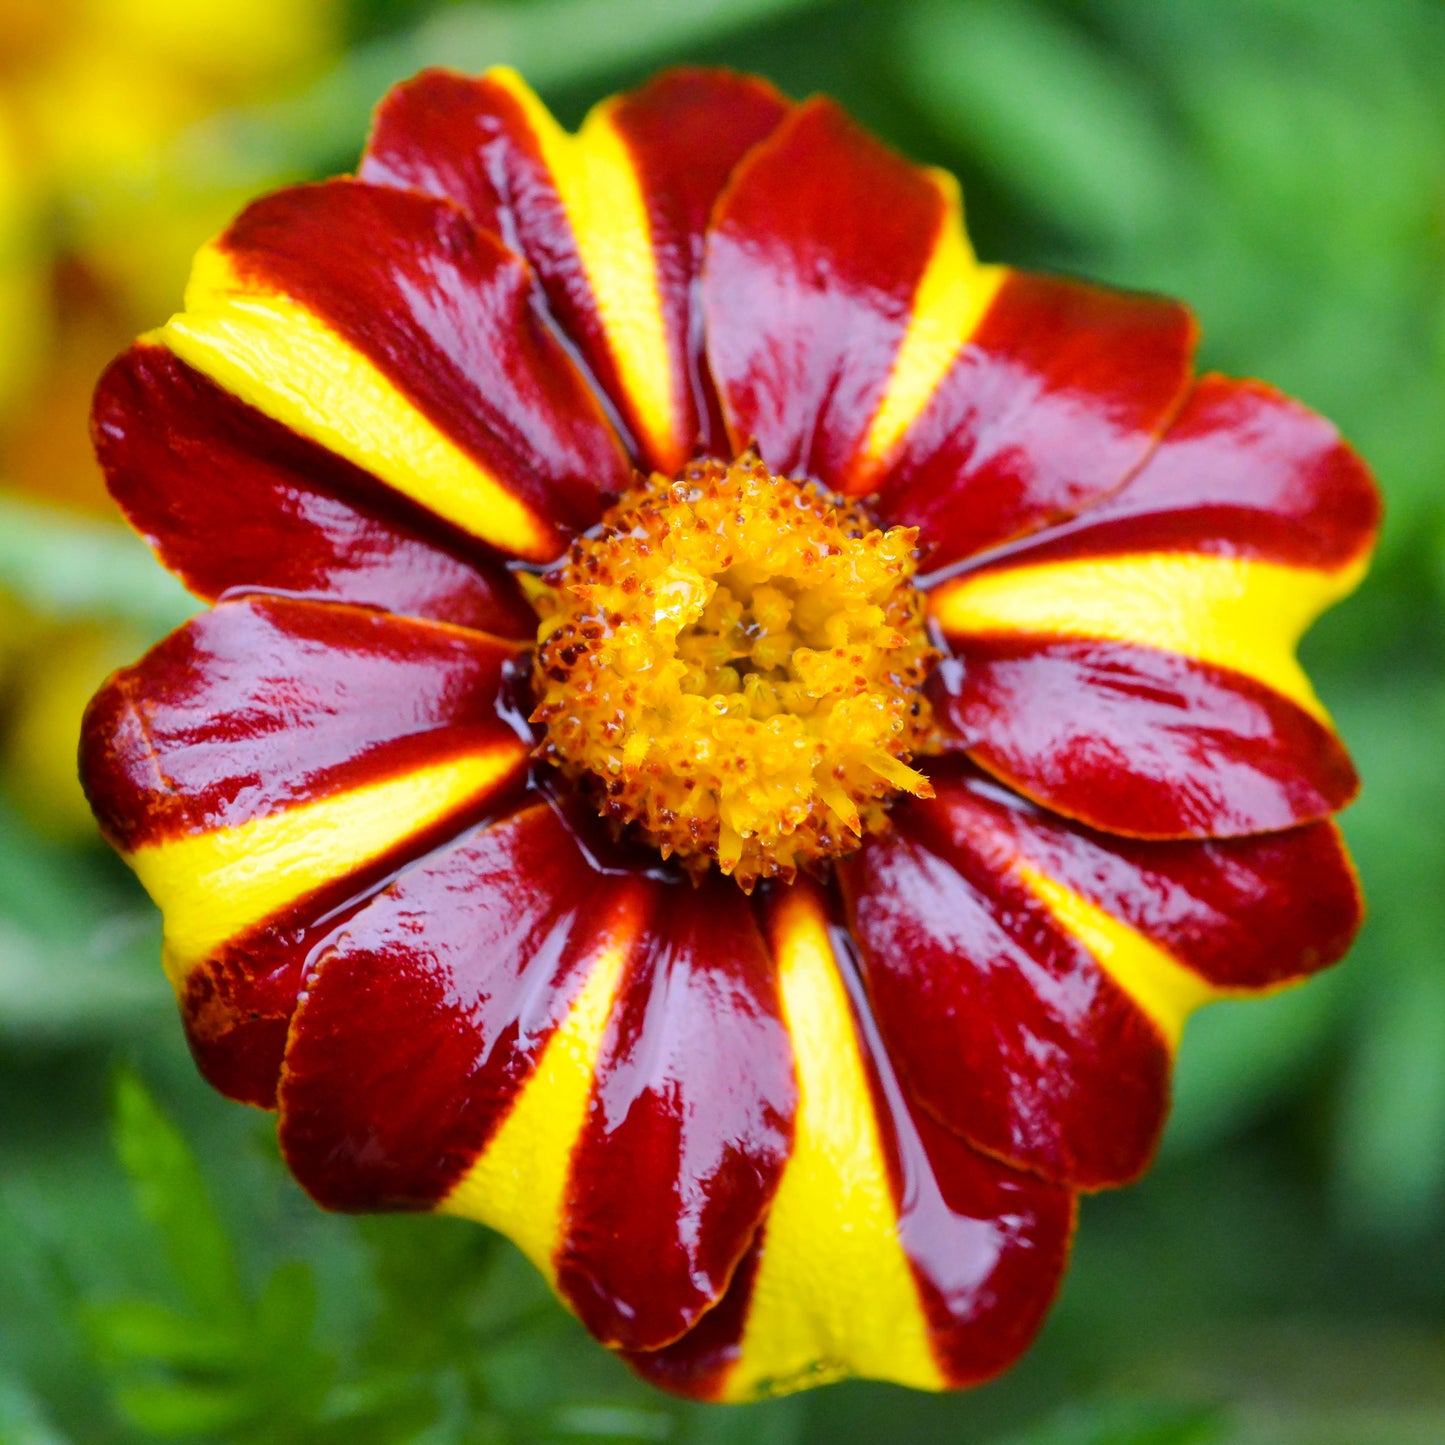 100 COURT JESTER MARIGOLD French Tagetes Patula Nana Red Yellow Striped Flower Seeds